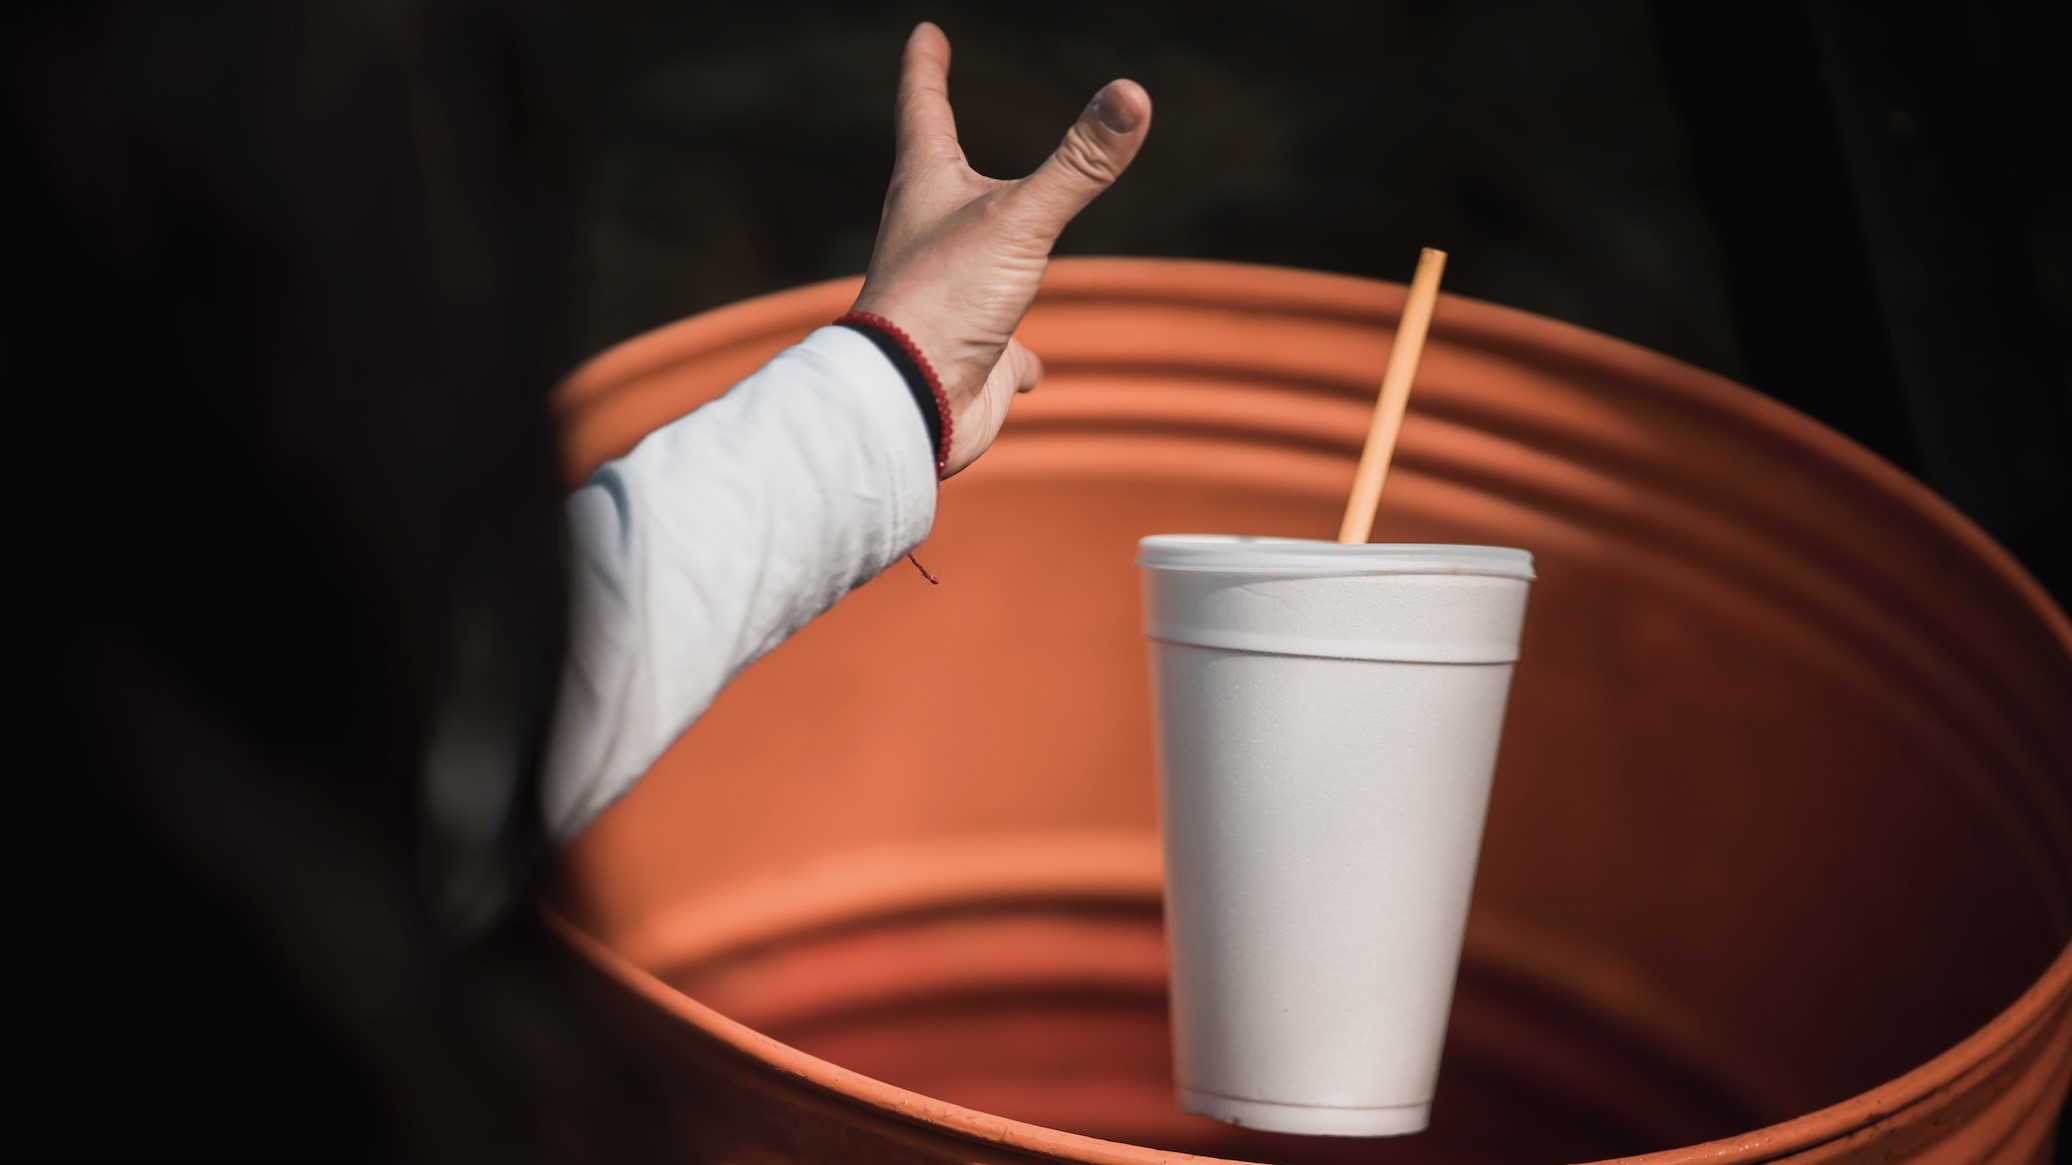 A person throwing away a polystyrene foam cup and straw into an orange bin